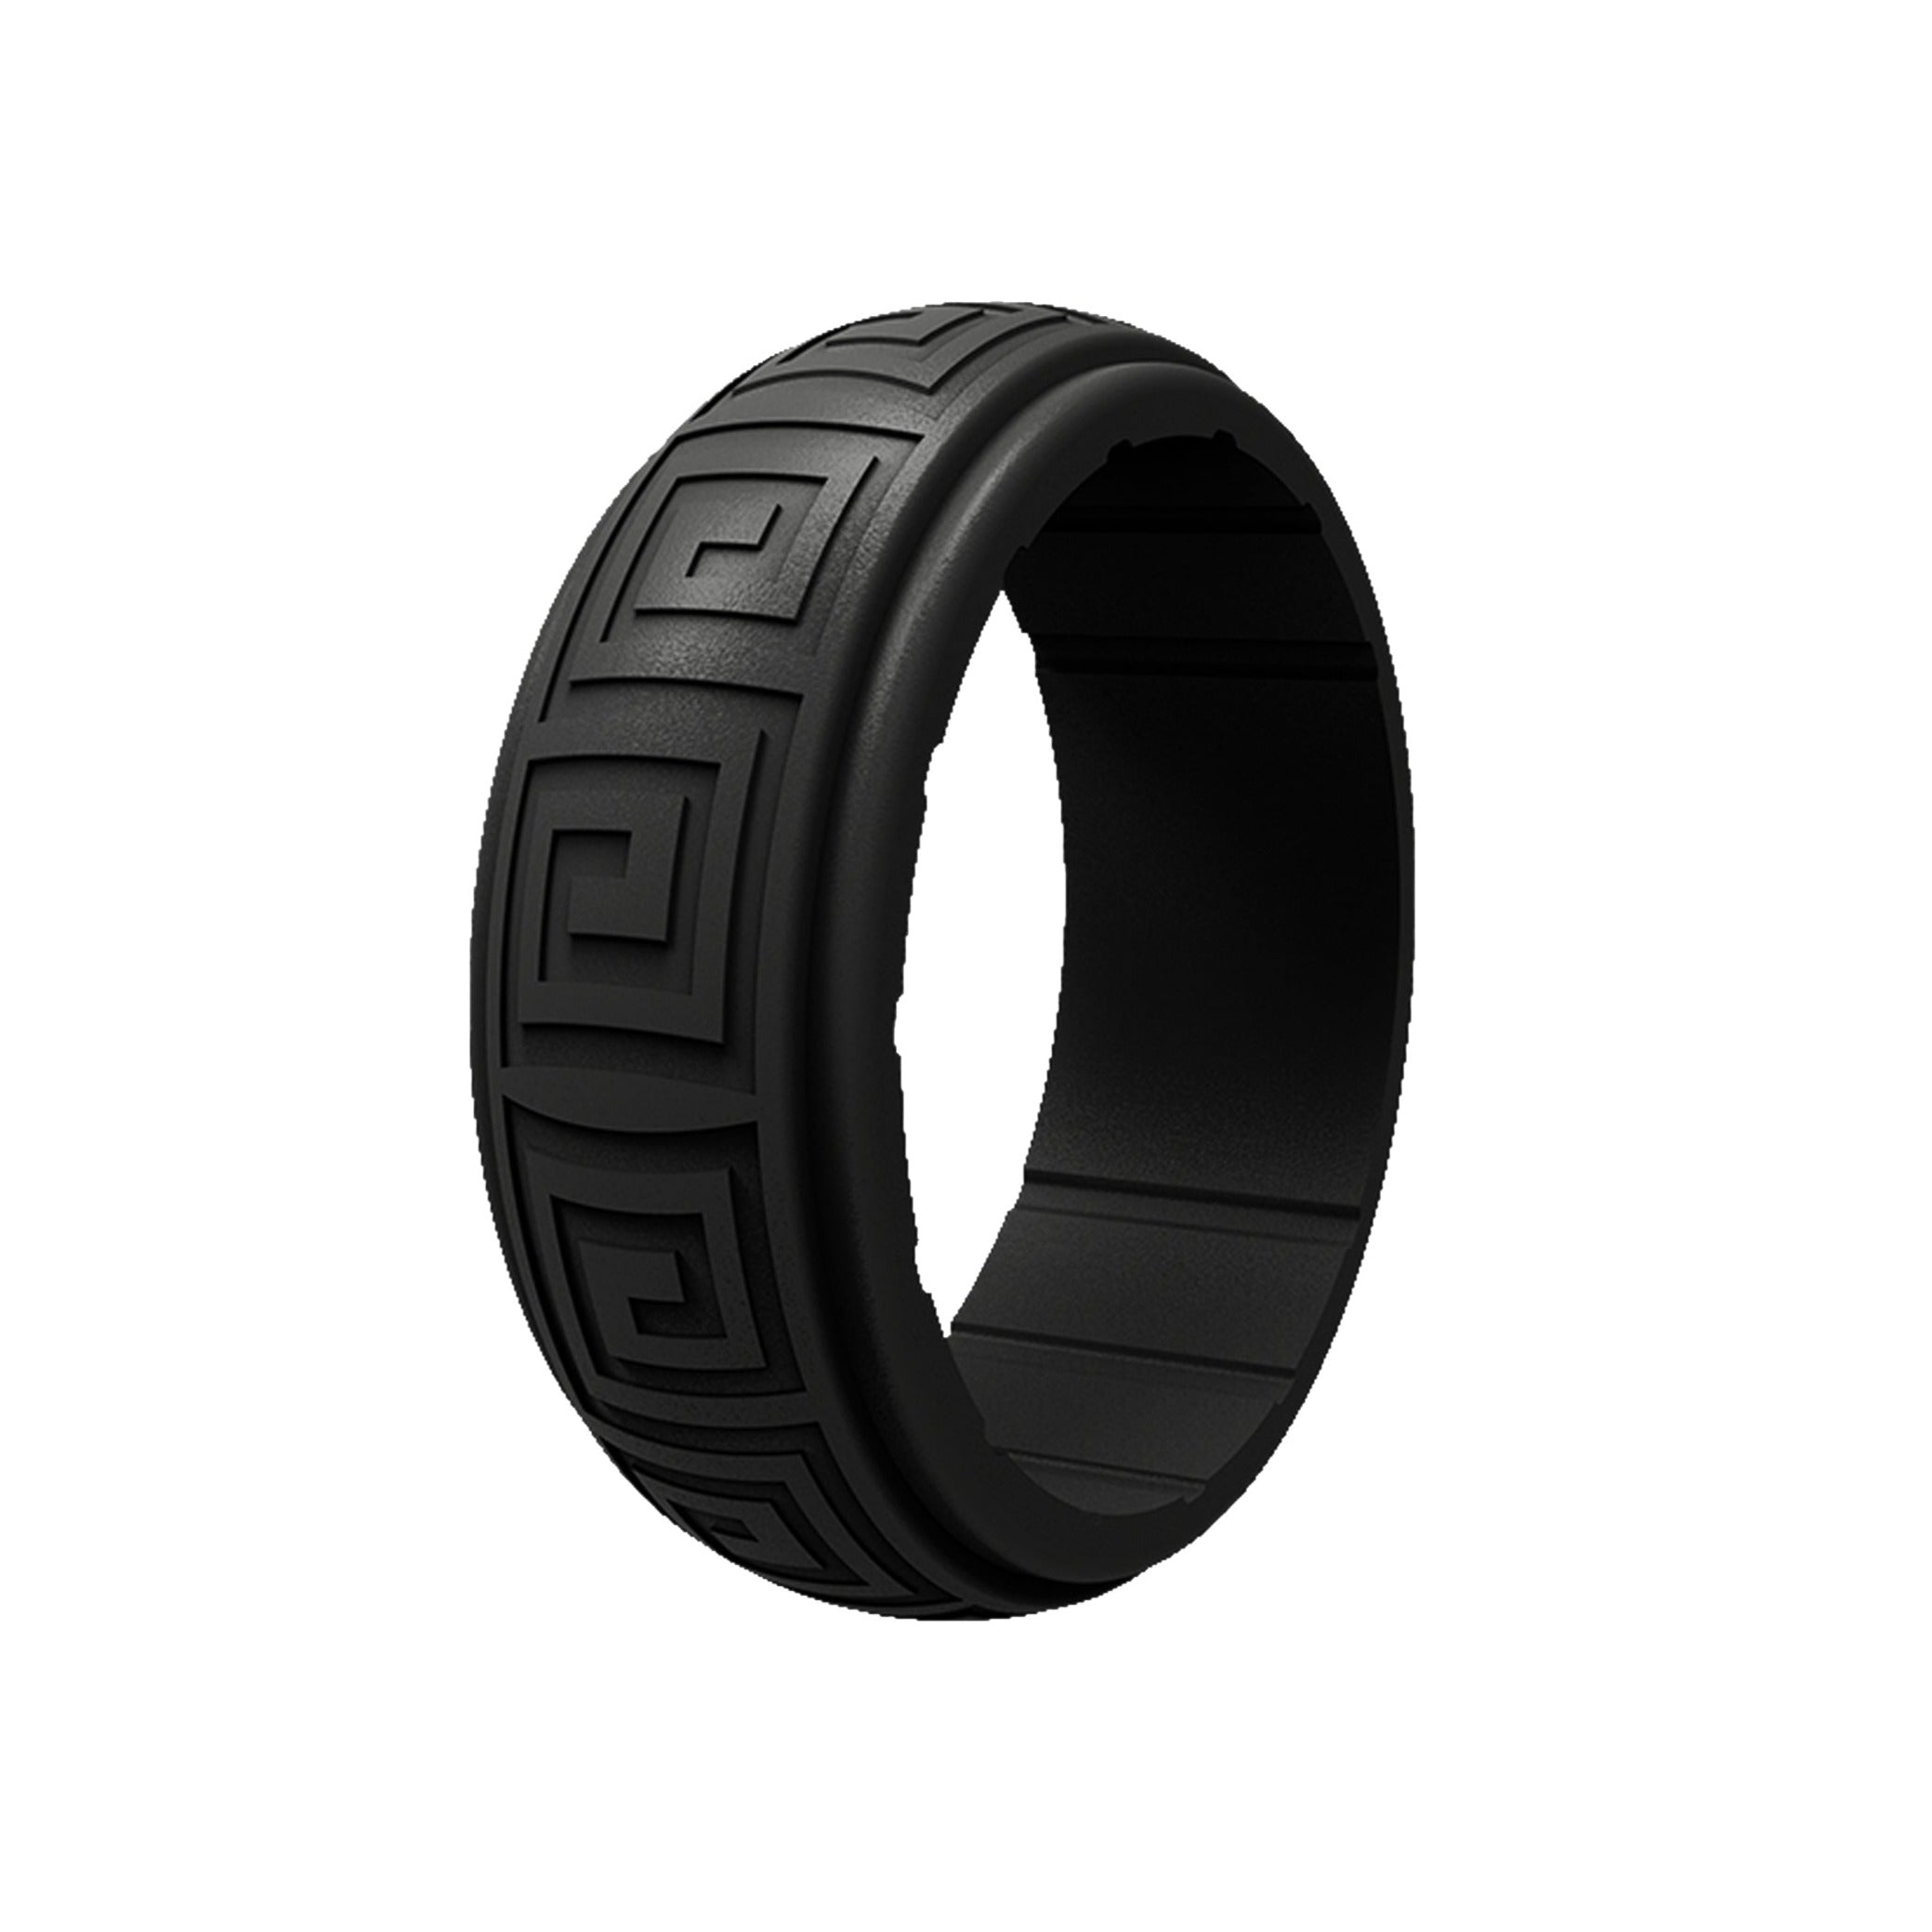 The Zeus - Silicone Ring